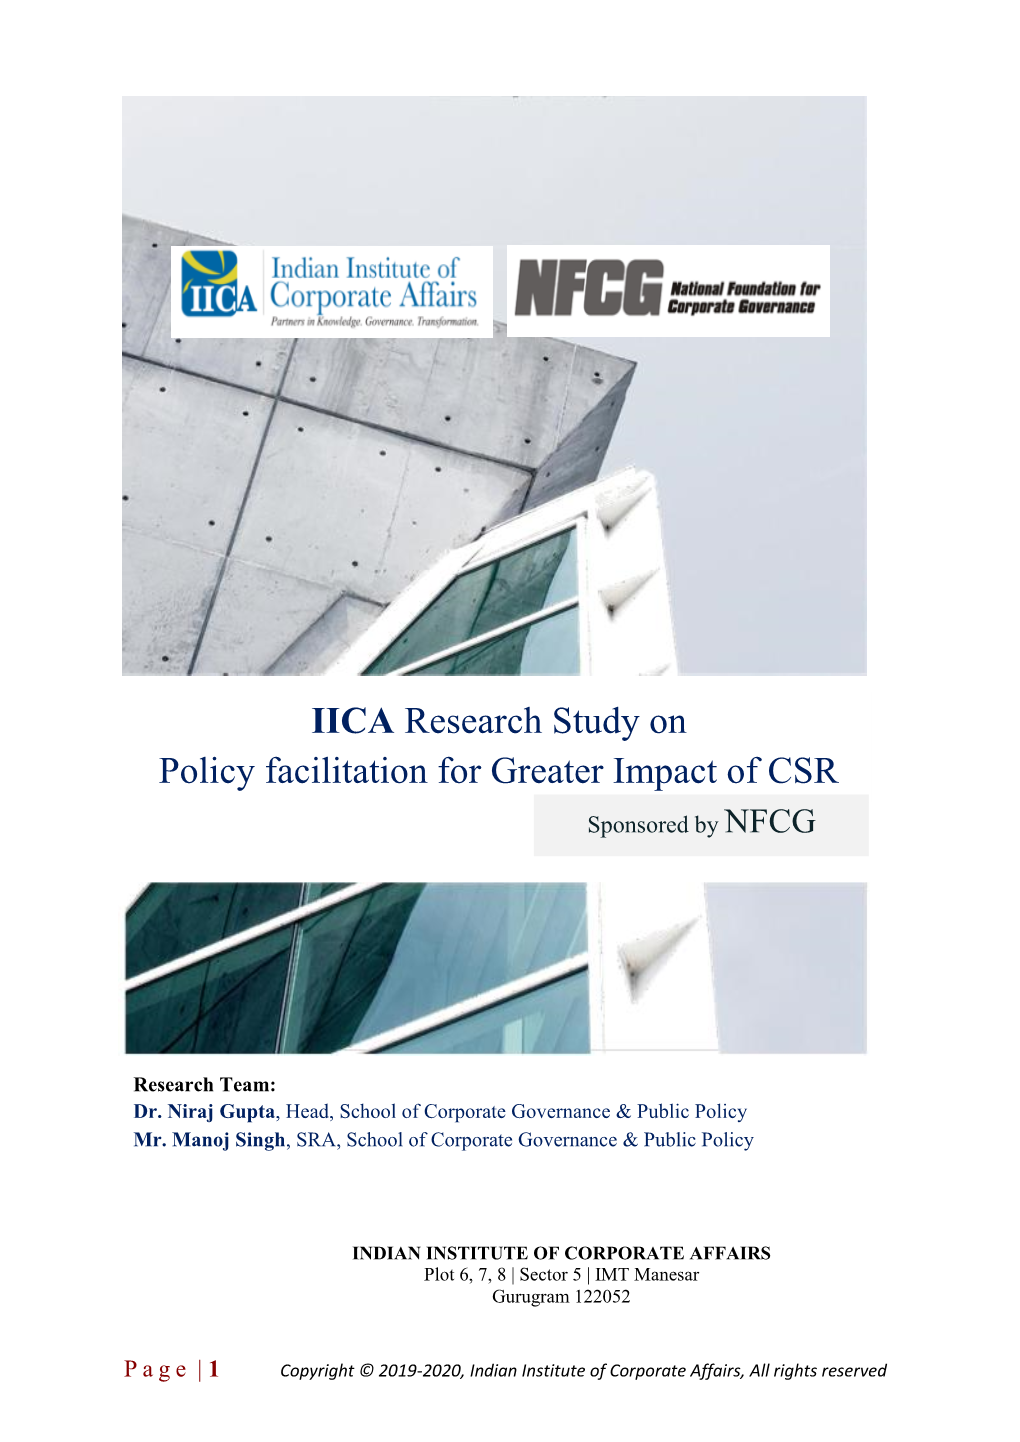 IICA Research Study on Policy Facilitation for Greater Impact Of